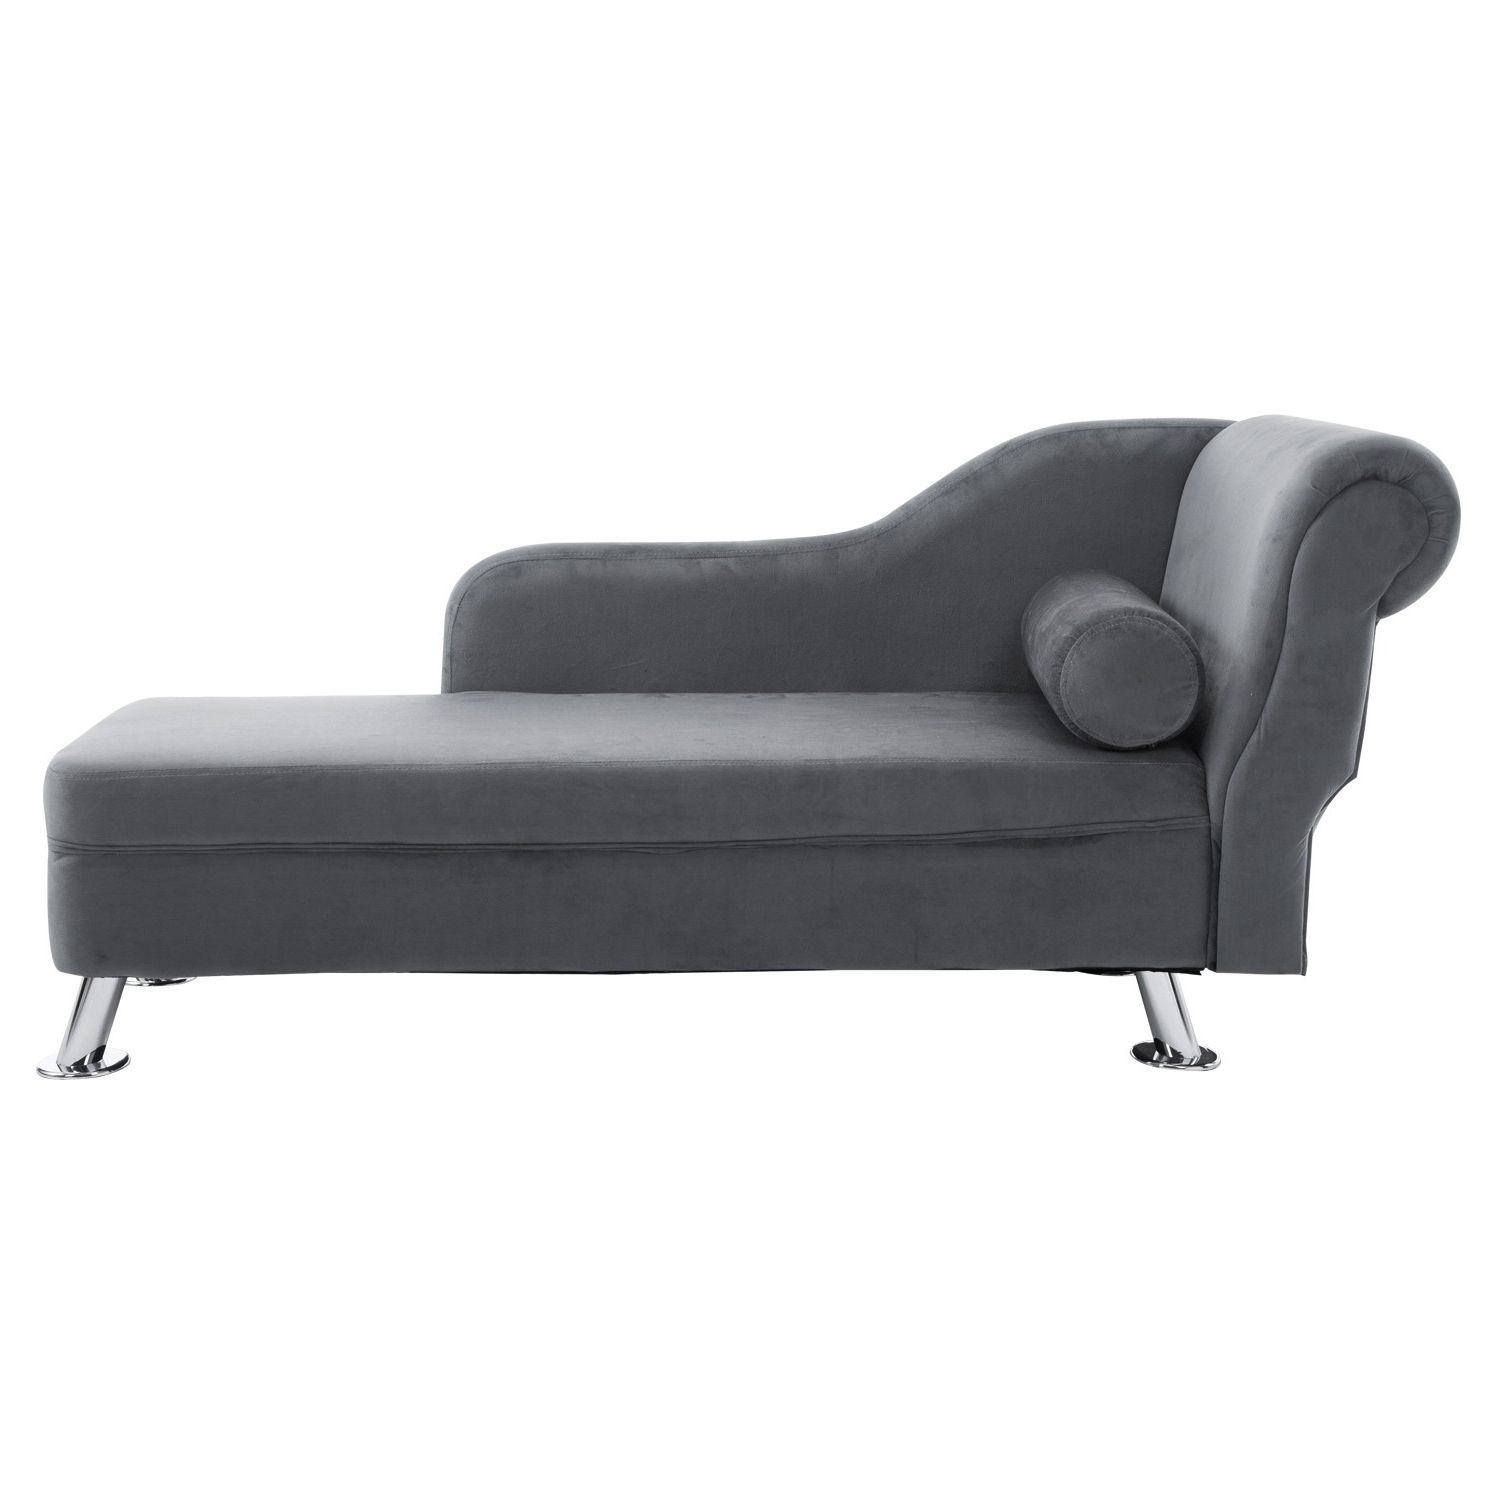 Grey Chaise Lounges Throughout Well Known Homcom 62" Chaise Lounge Grey (View 8 of 15)